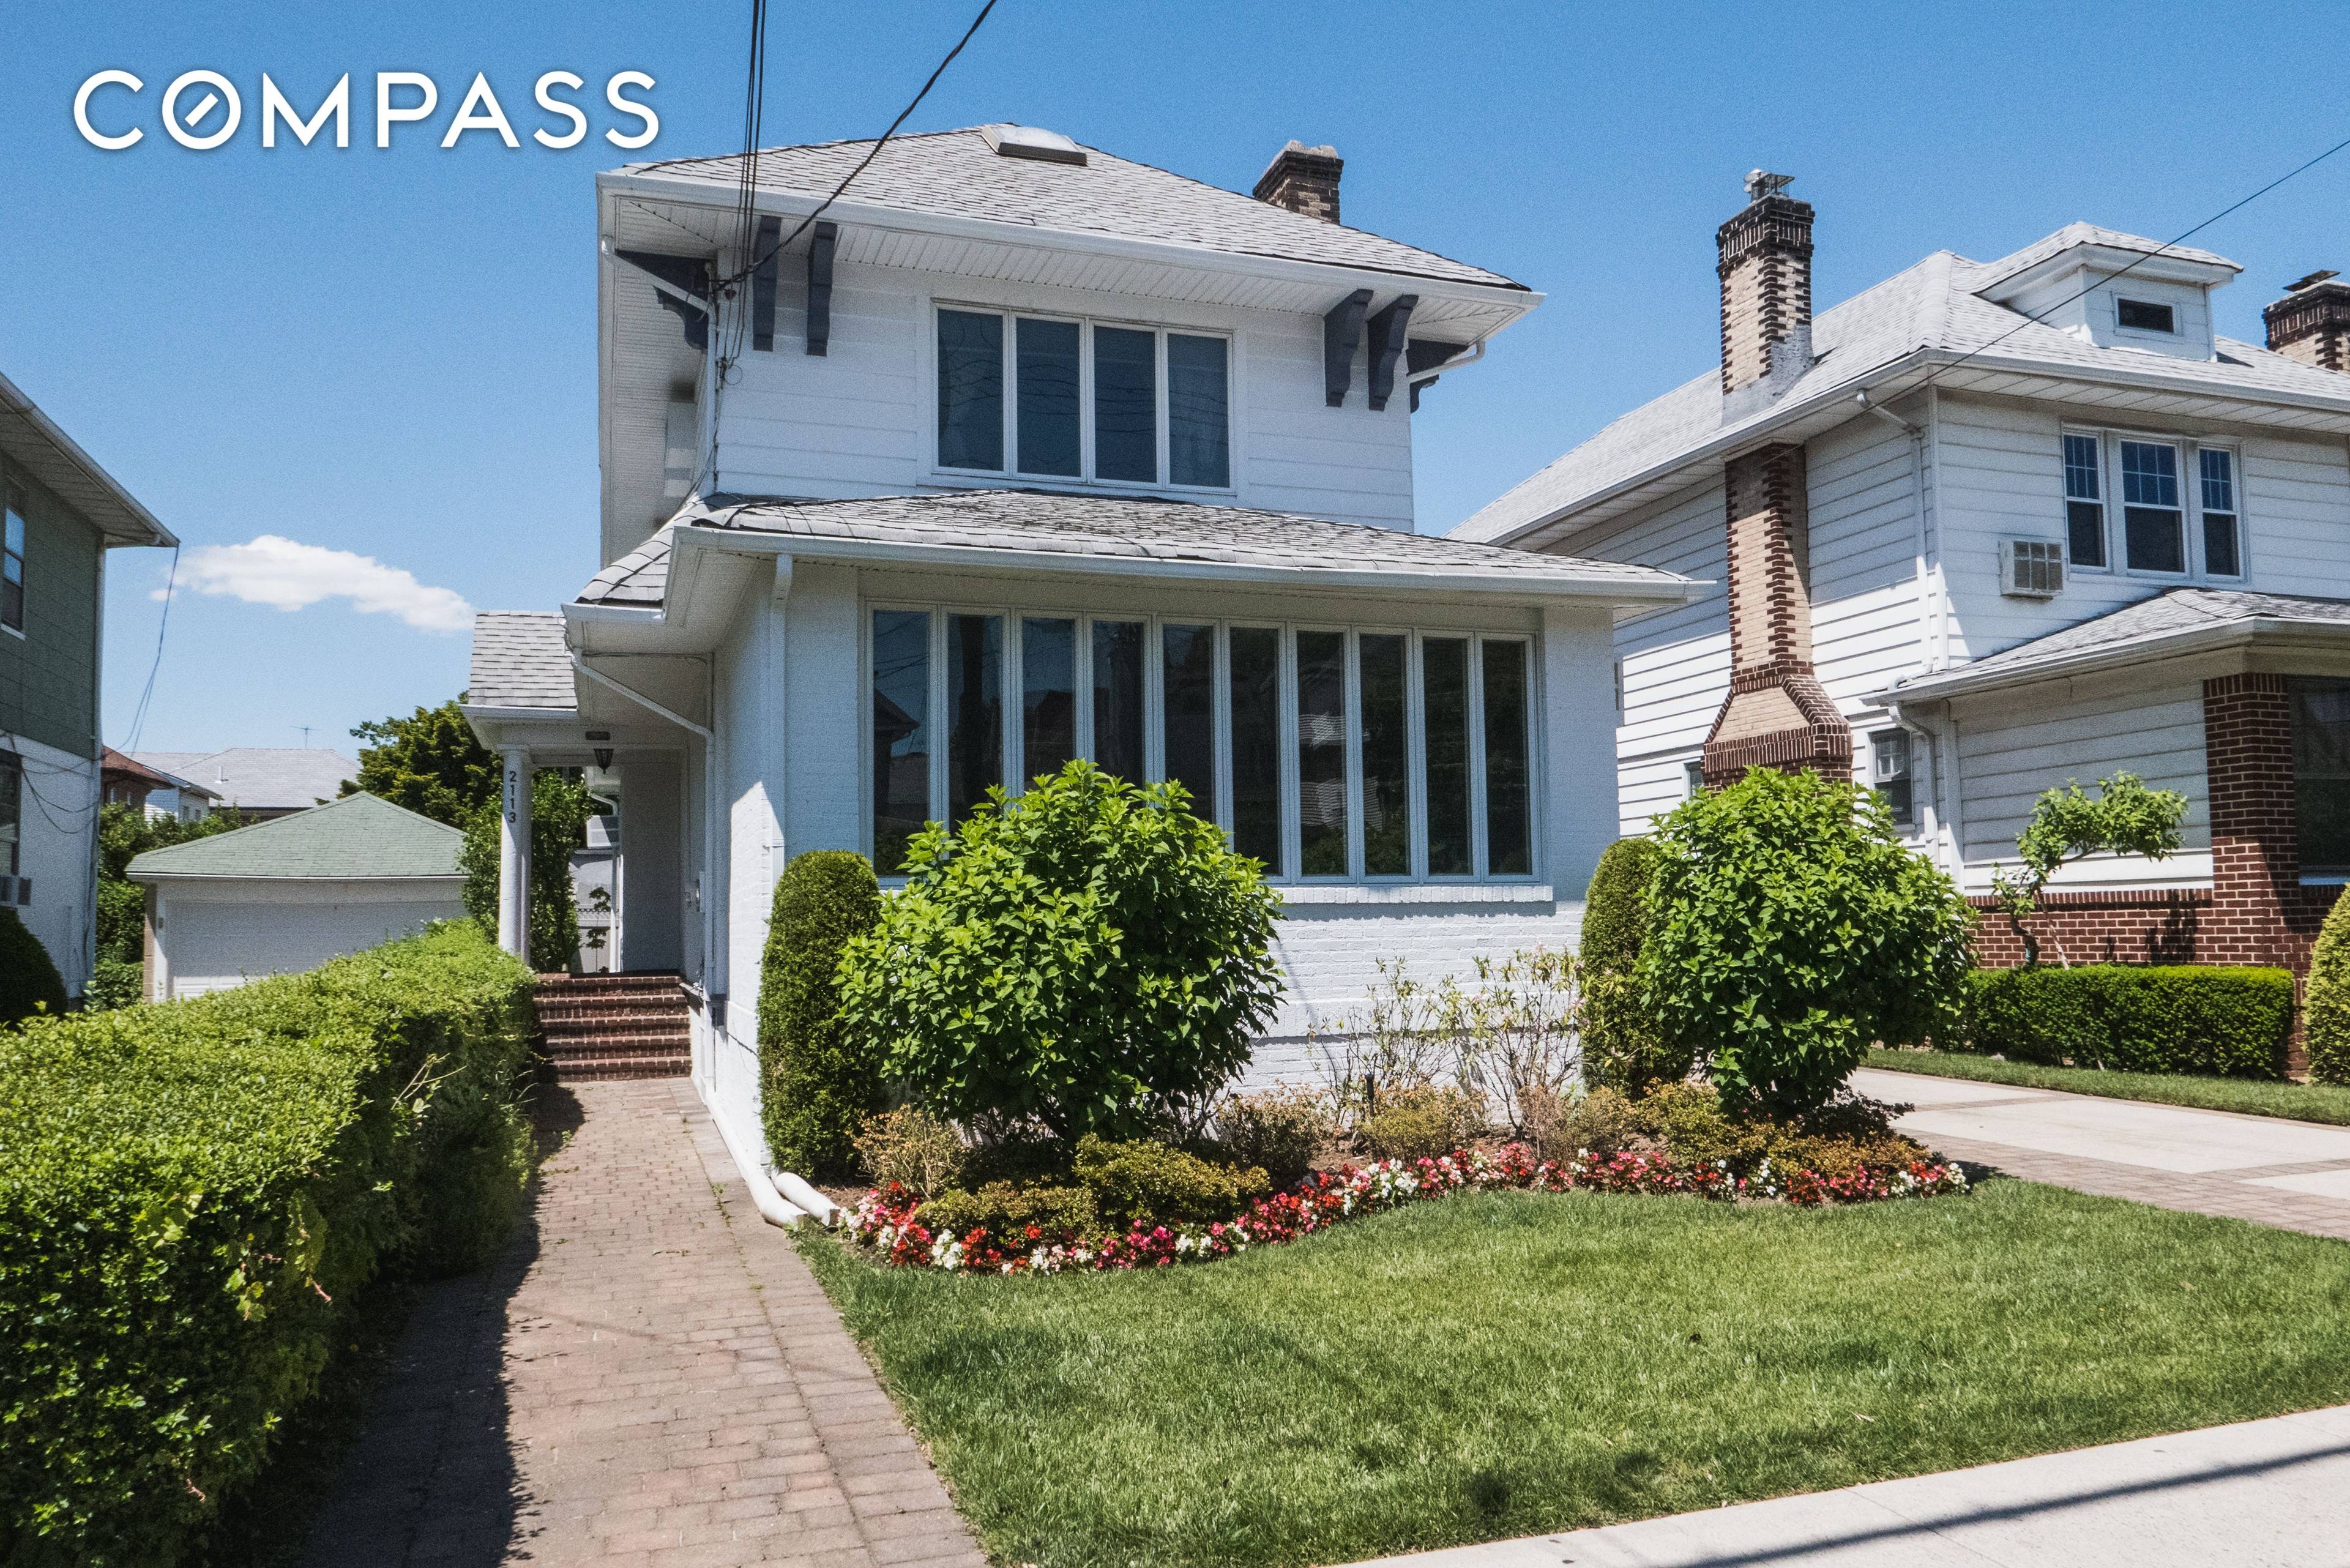 This impeccably preserved and restored house is the one you have been waiting for, situated on a prime lot in the most desirable location with a large two car garage.